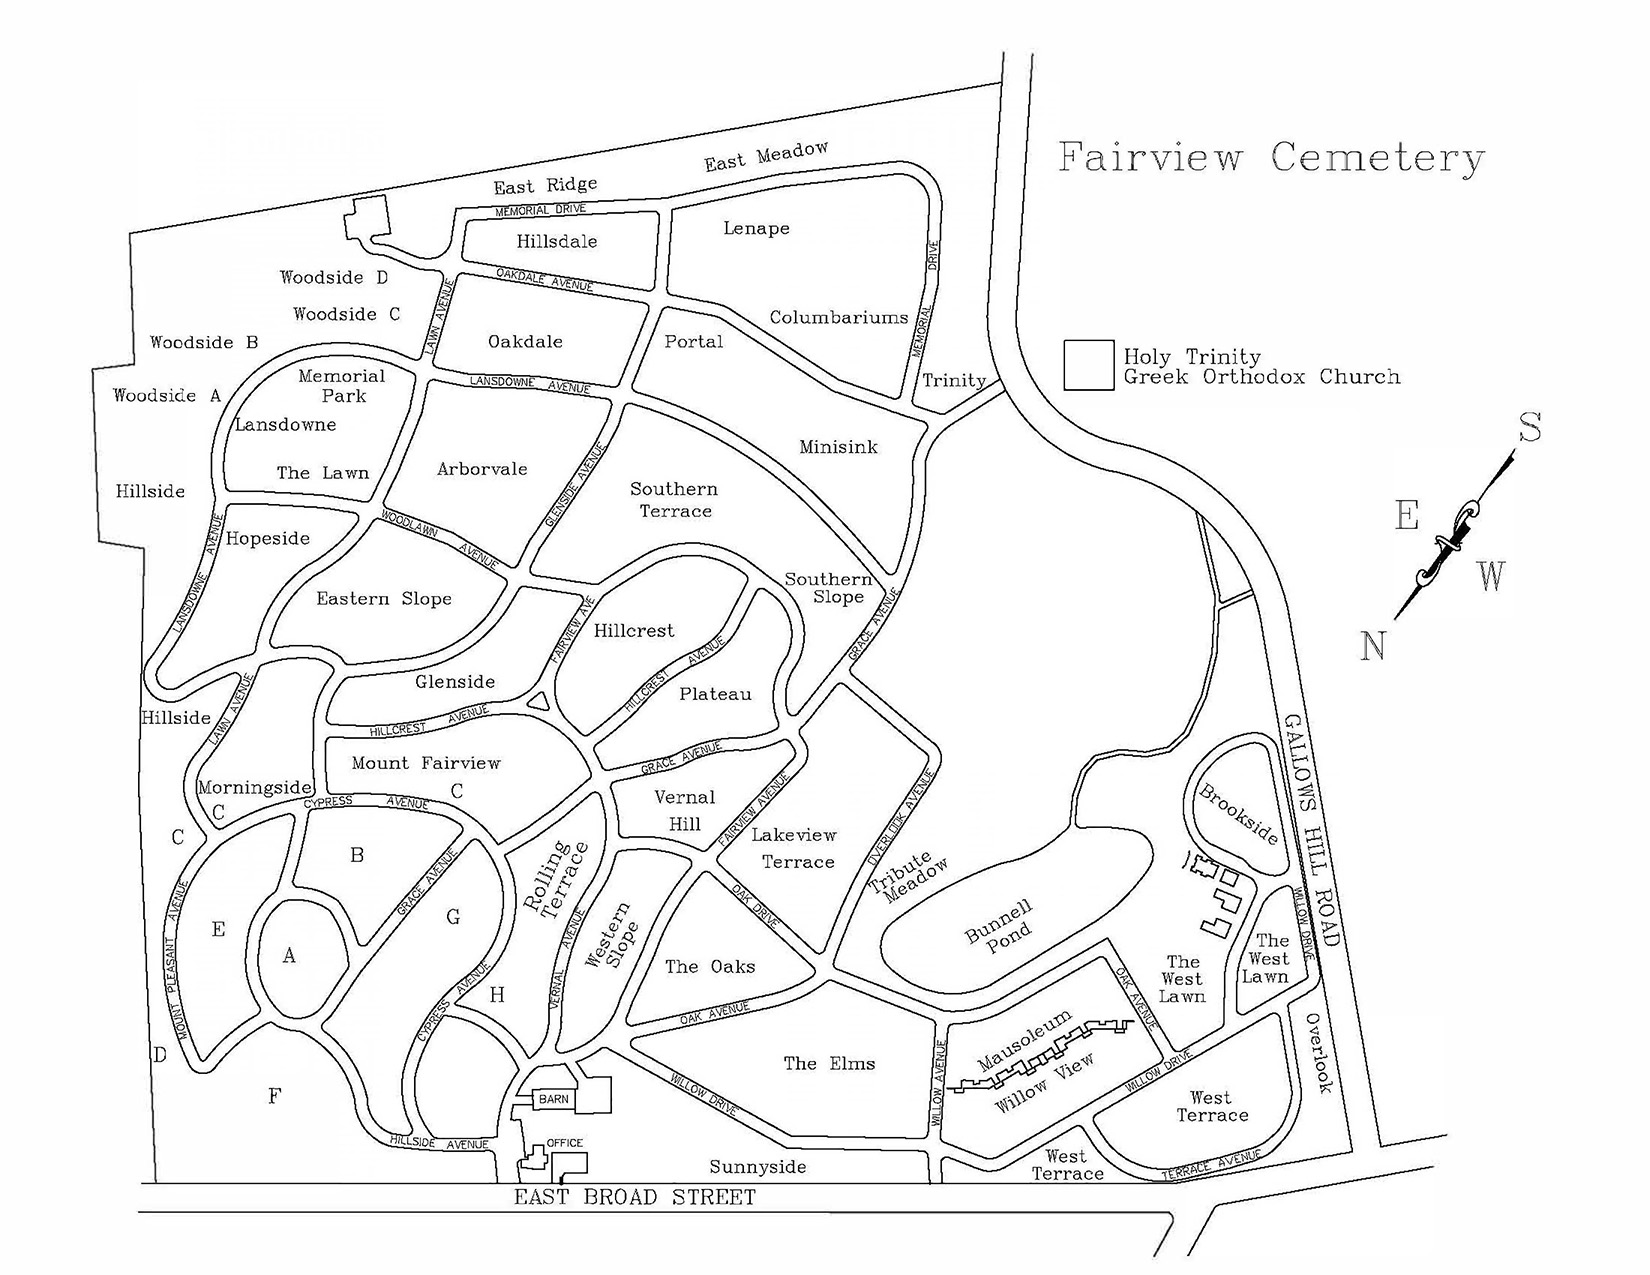 Map of Fairview Cemetery in Westfield, New Jersey